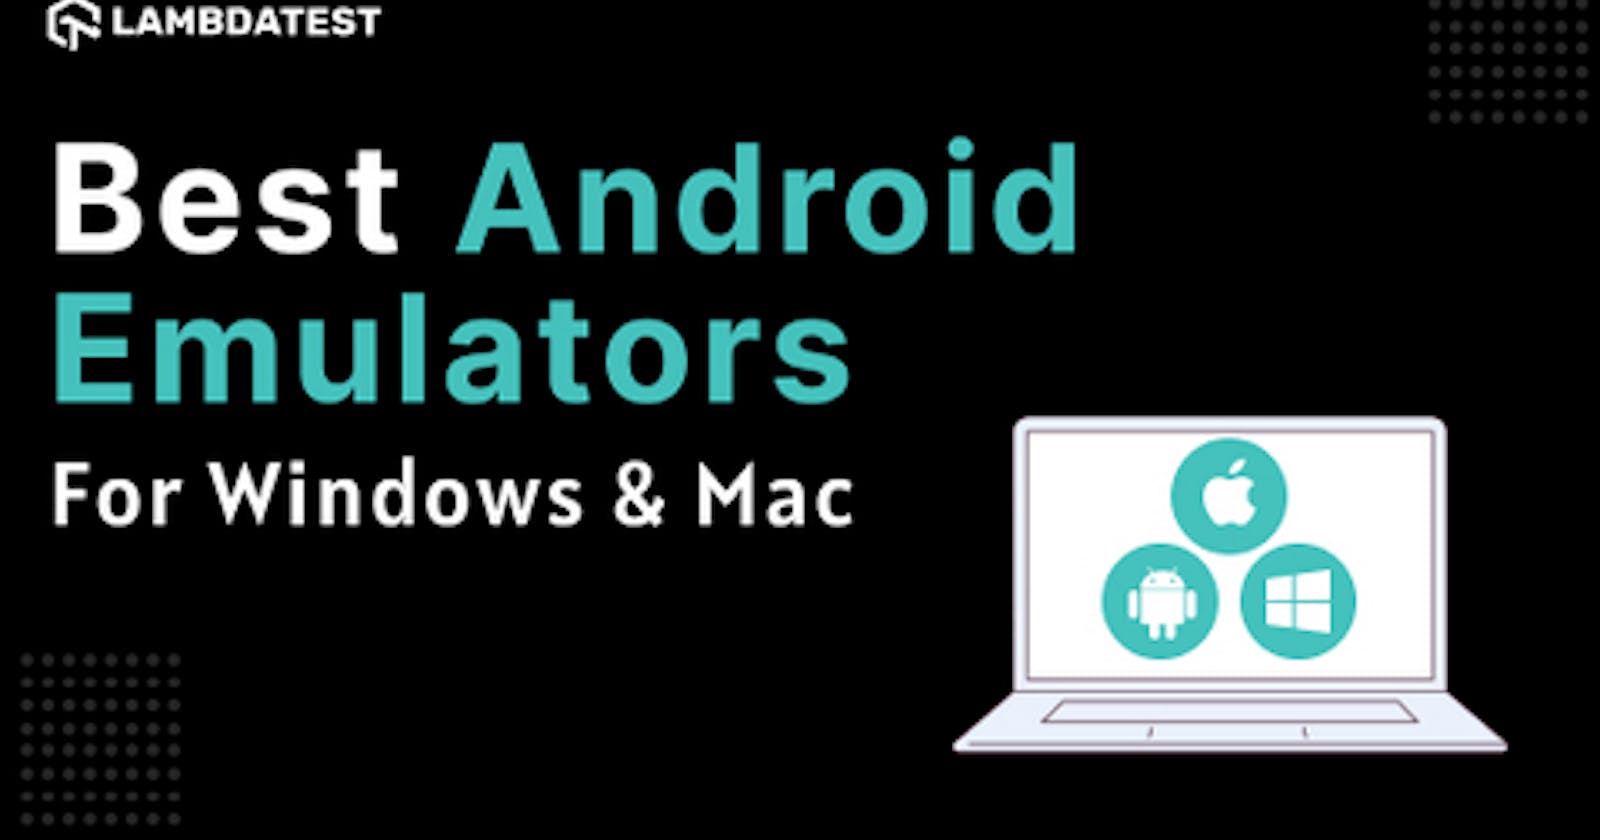 16 Best Android Emulators For Windows & Mac In 2022